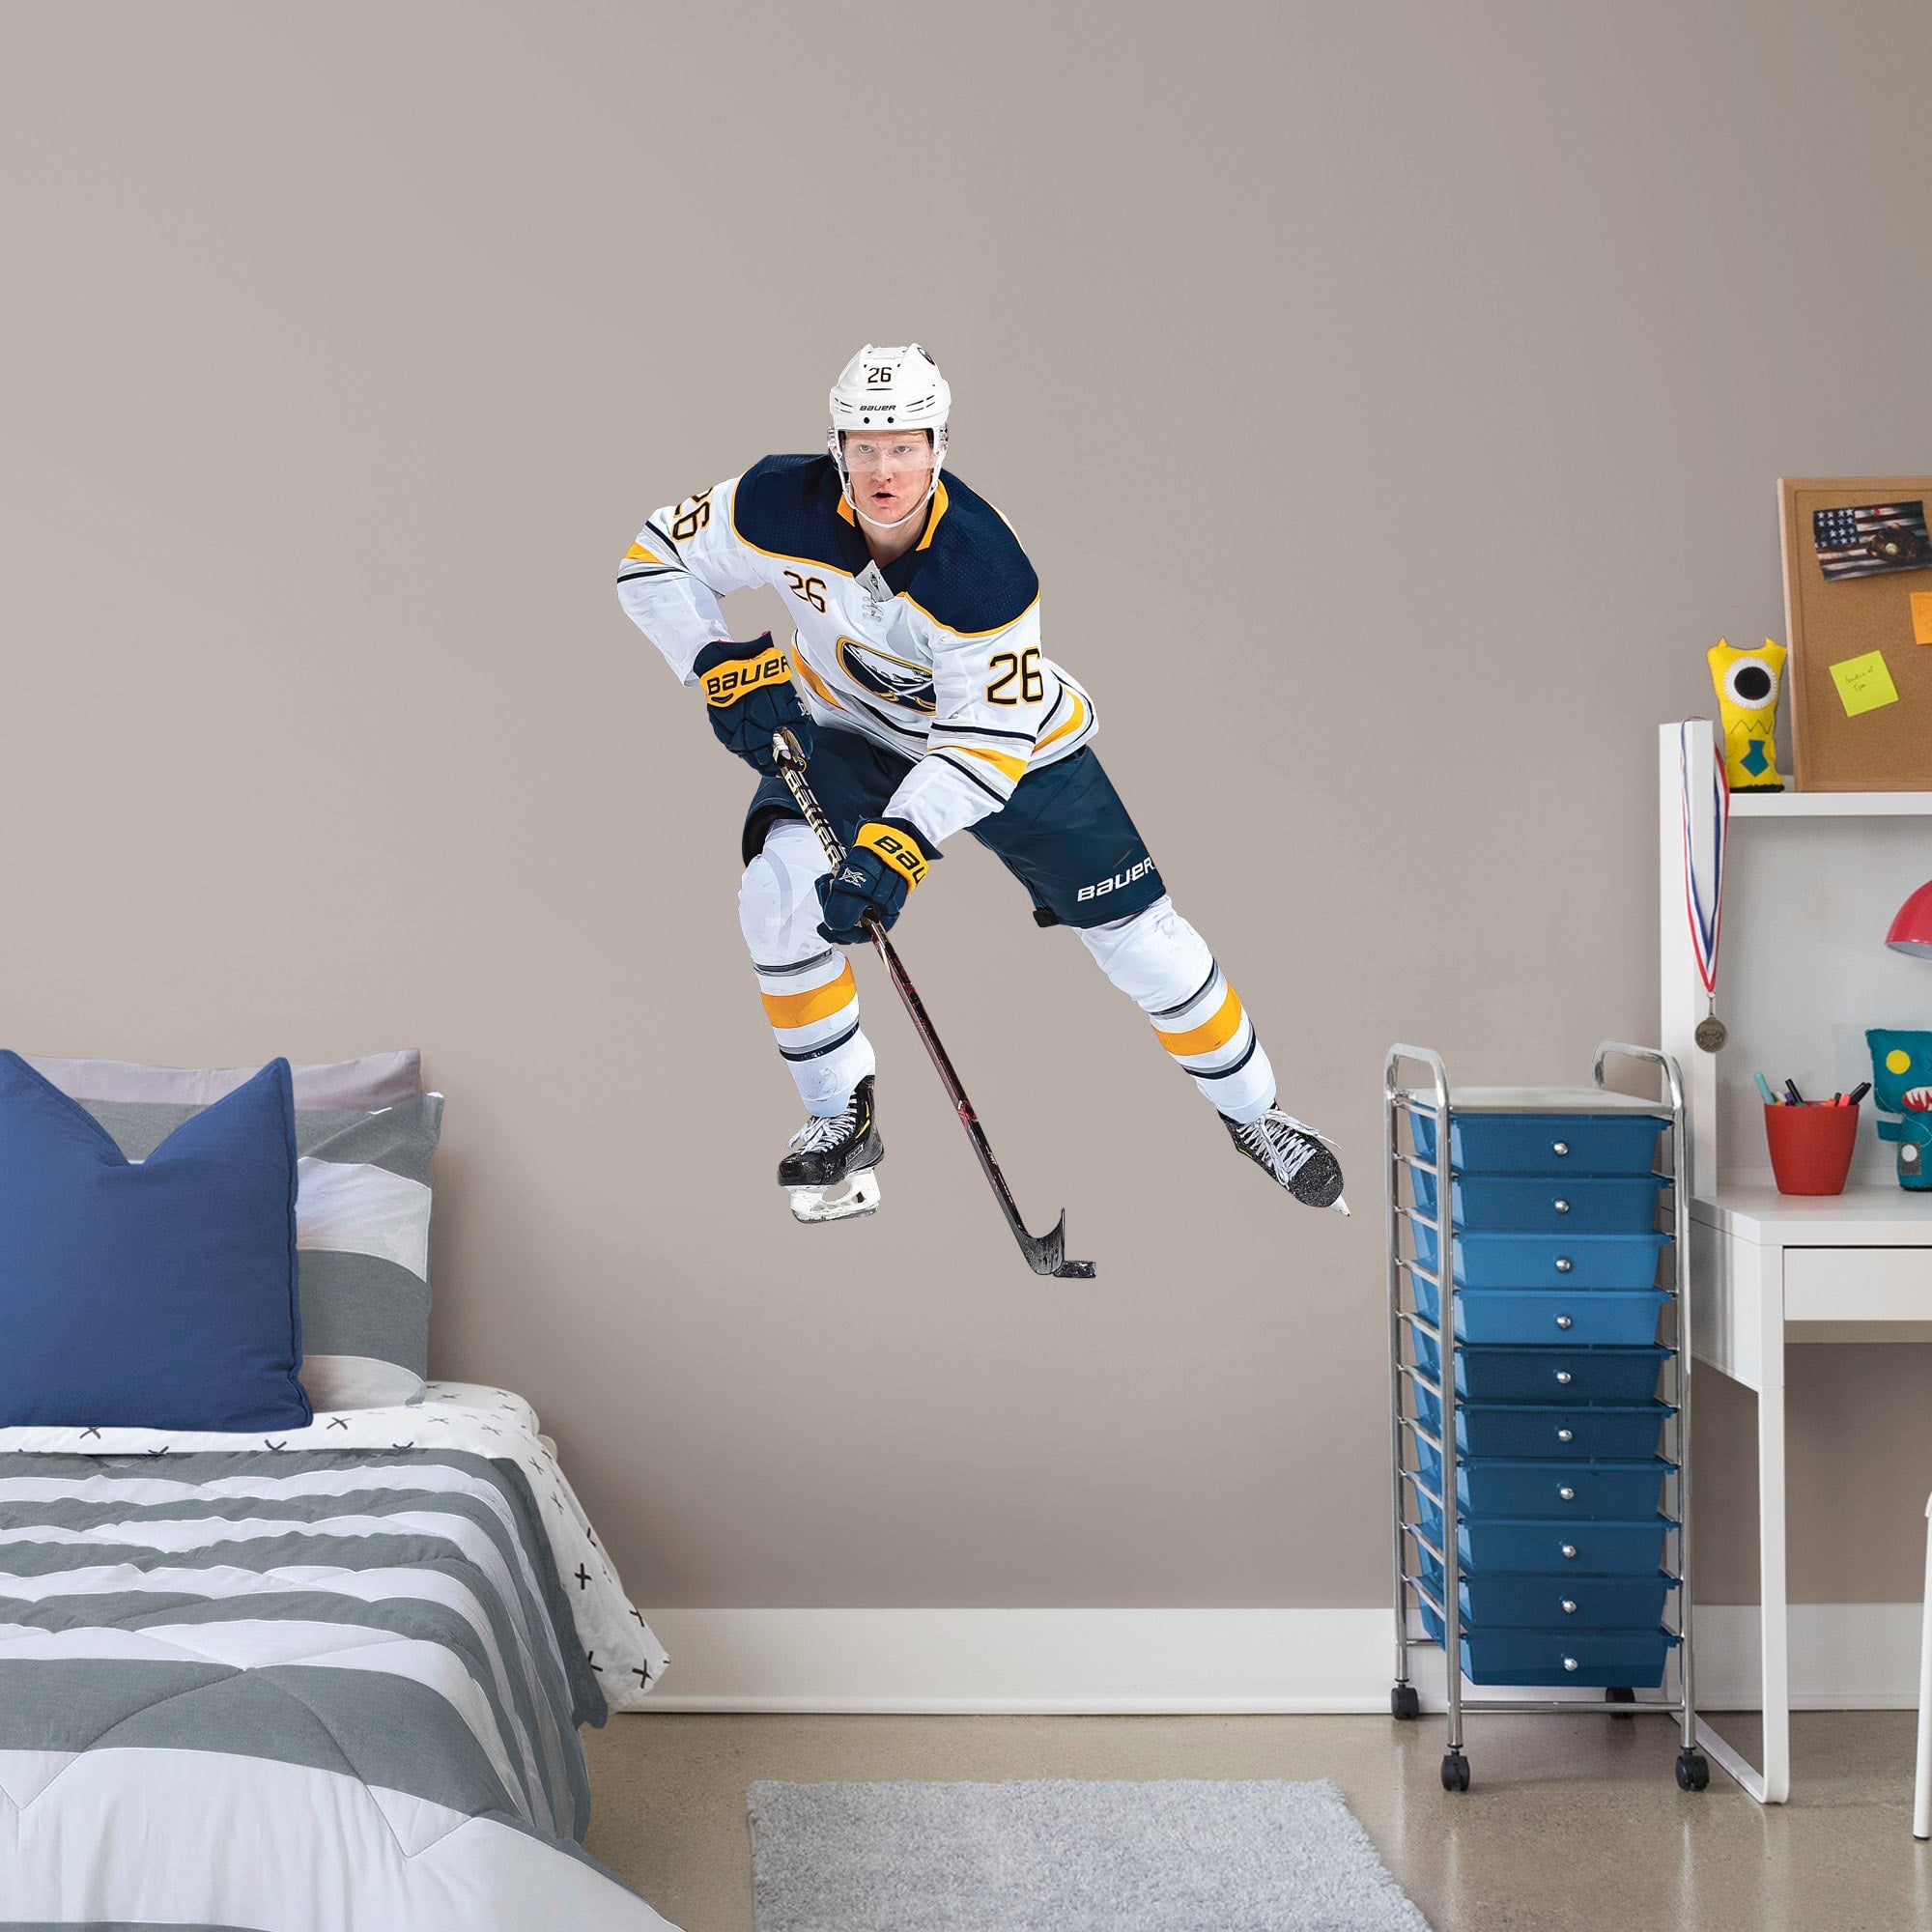 Rasmus Dahlin for Buffalo Sabres - Officially Licensed NHL Removable Wall Decal Giant Athlete + 2 Team Decals (39"W x 50"H) by F